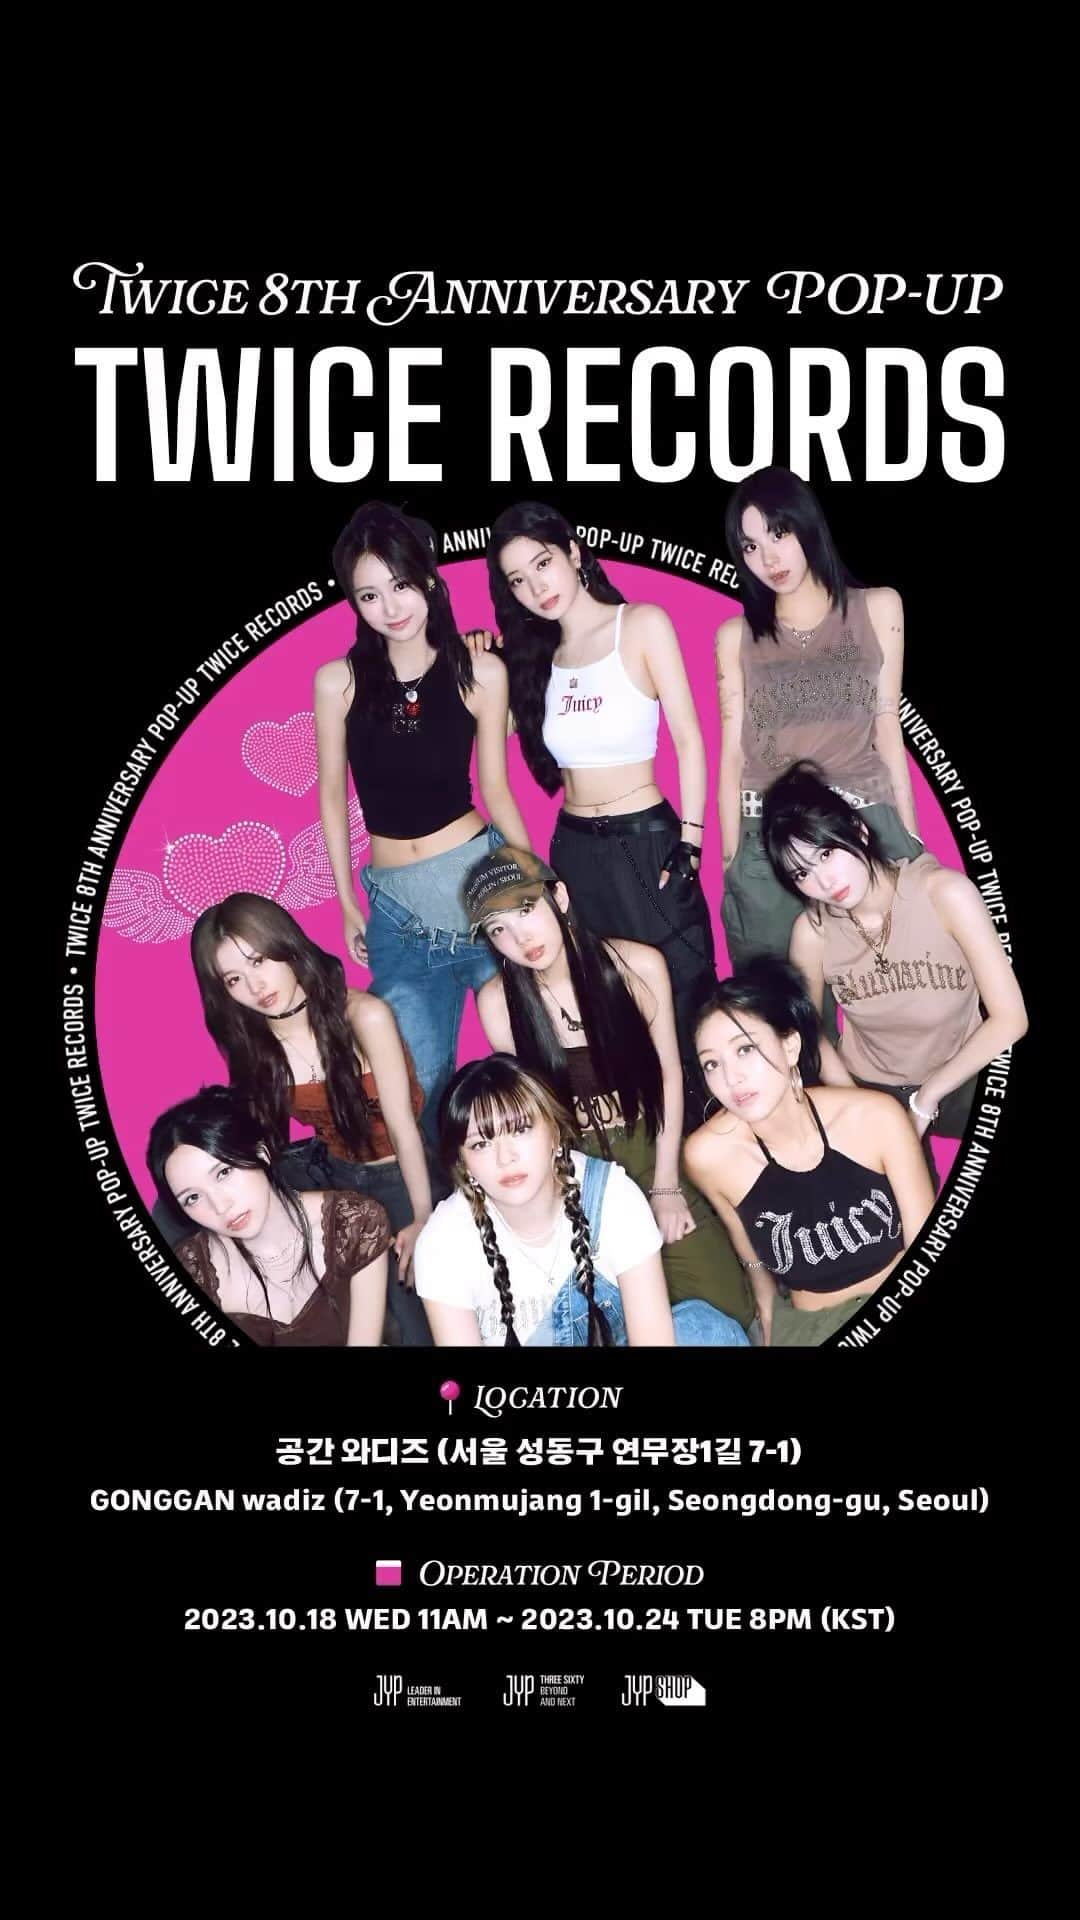 TWICEのインスタグラム：「TWICE 8TH ANNIVERSARY POP-UP STORE TWICE RECORDS💿💿  TWICE RECORDS is opening soon🪄 Explore our retro-themed pop-up store with sweet surprises!  Take a photo with TWICE at the photobooth, check out exclusive merch, and other exciting activities✨  Come & Celebrate TWICE‘s 8th Anniversary with ONCE🍭  📍Location  ➠ 공간 와디즈 | GONGGAN wadiz  📍Operation Period  ➠ 10.18 WED 11AM ~ 10.24 TUE 8PM (KST)  #트와이스 #TWICE #원스 #ONCE  #TWICE_8TH_ANNIVERSARY #TWICE_RECORDS」